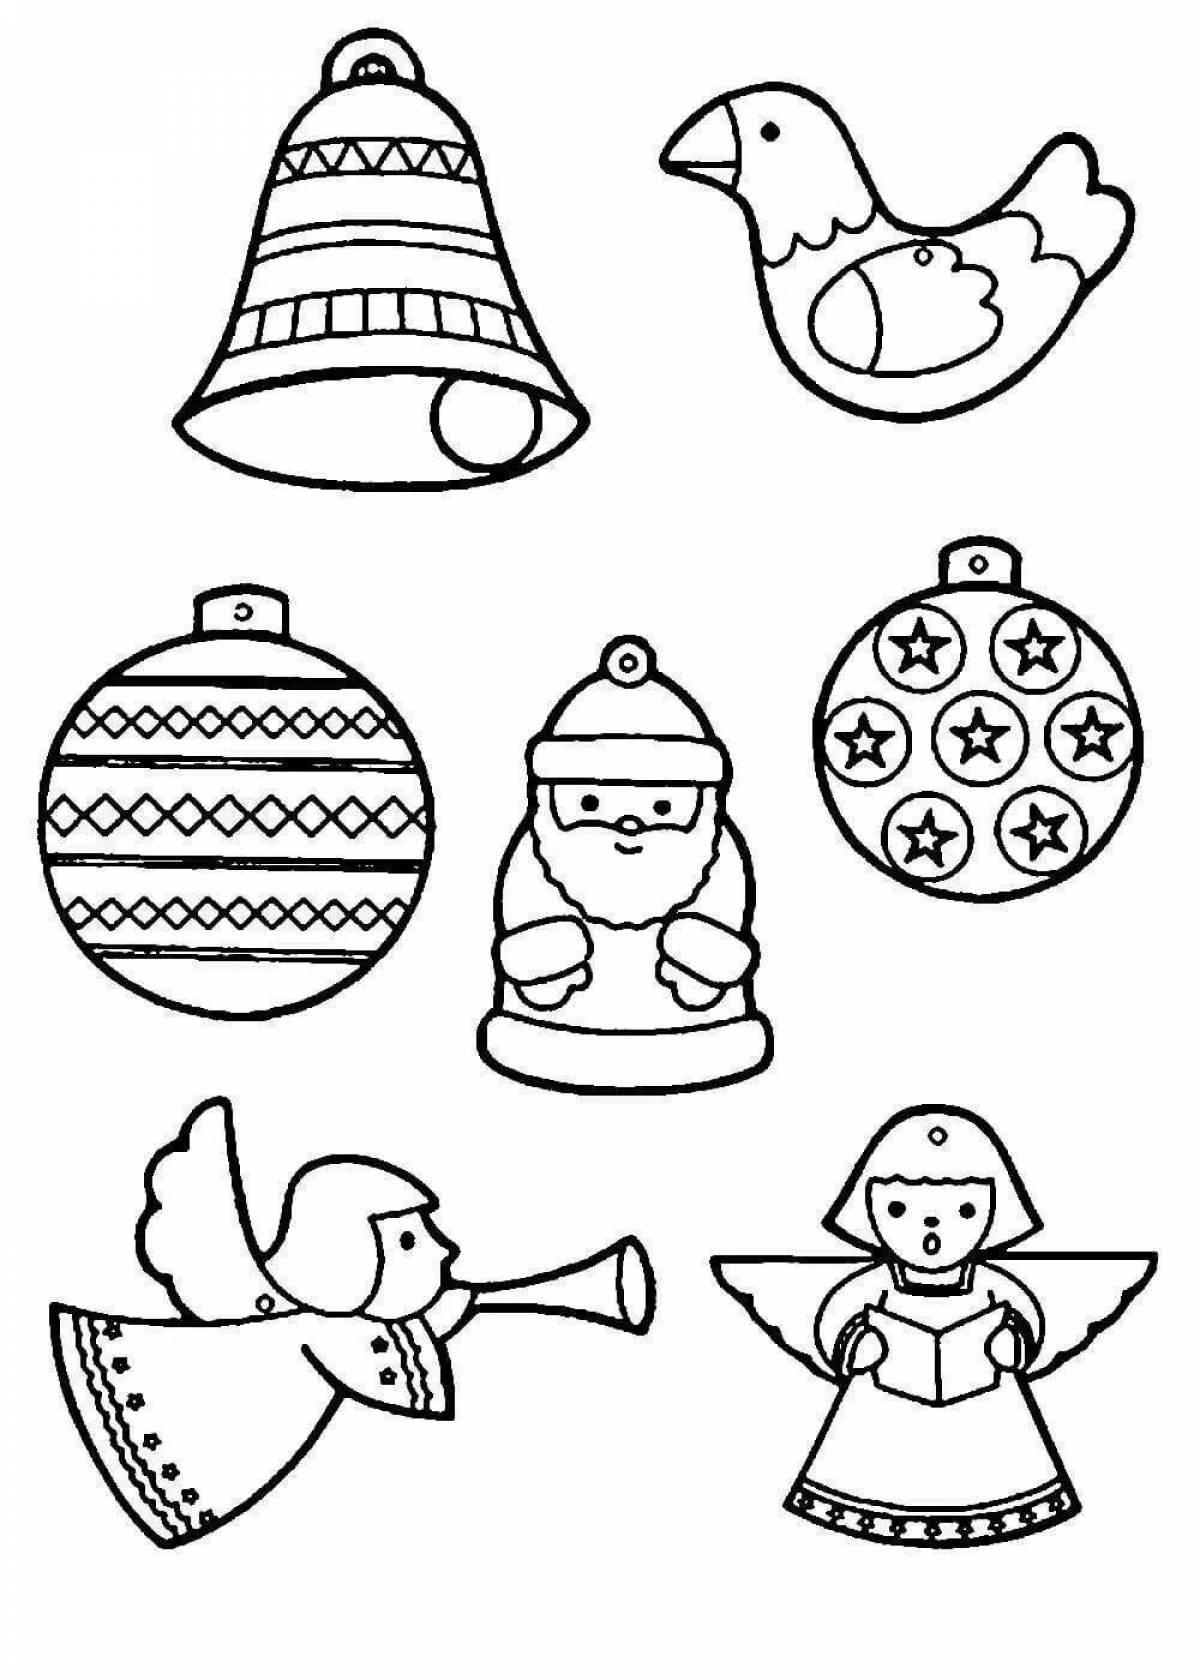 Cute Christmas toy coloring book